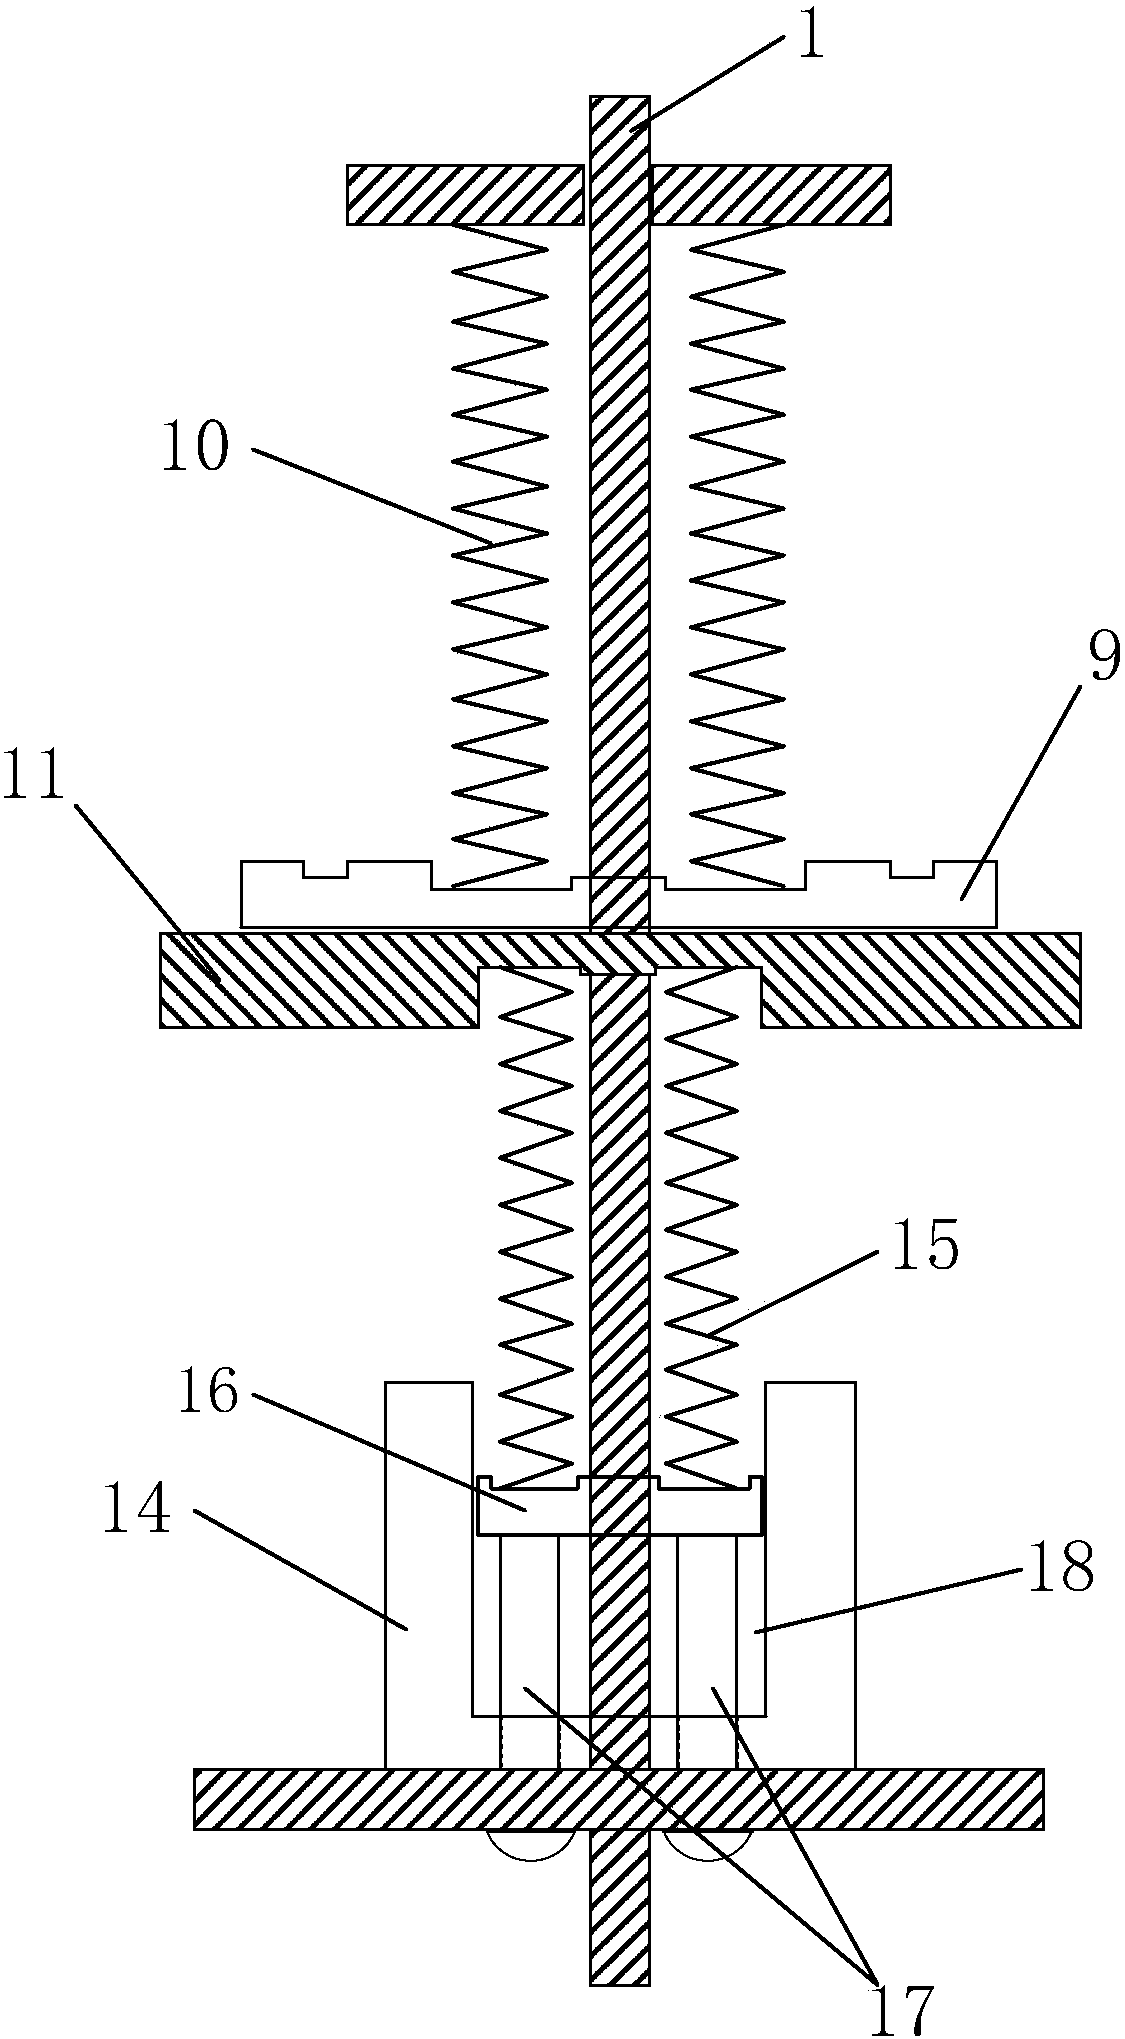 A monostable permanent magnet mechanism for high voltage circuit breaker with combined opening spring